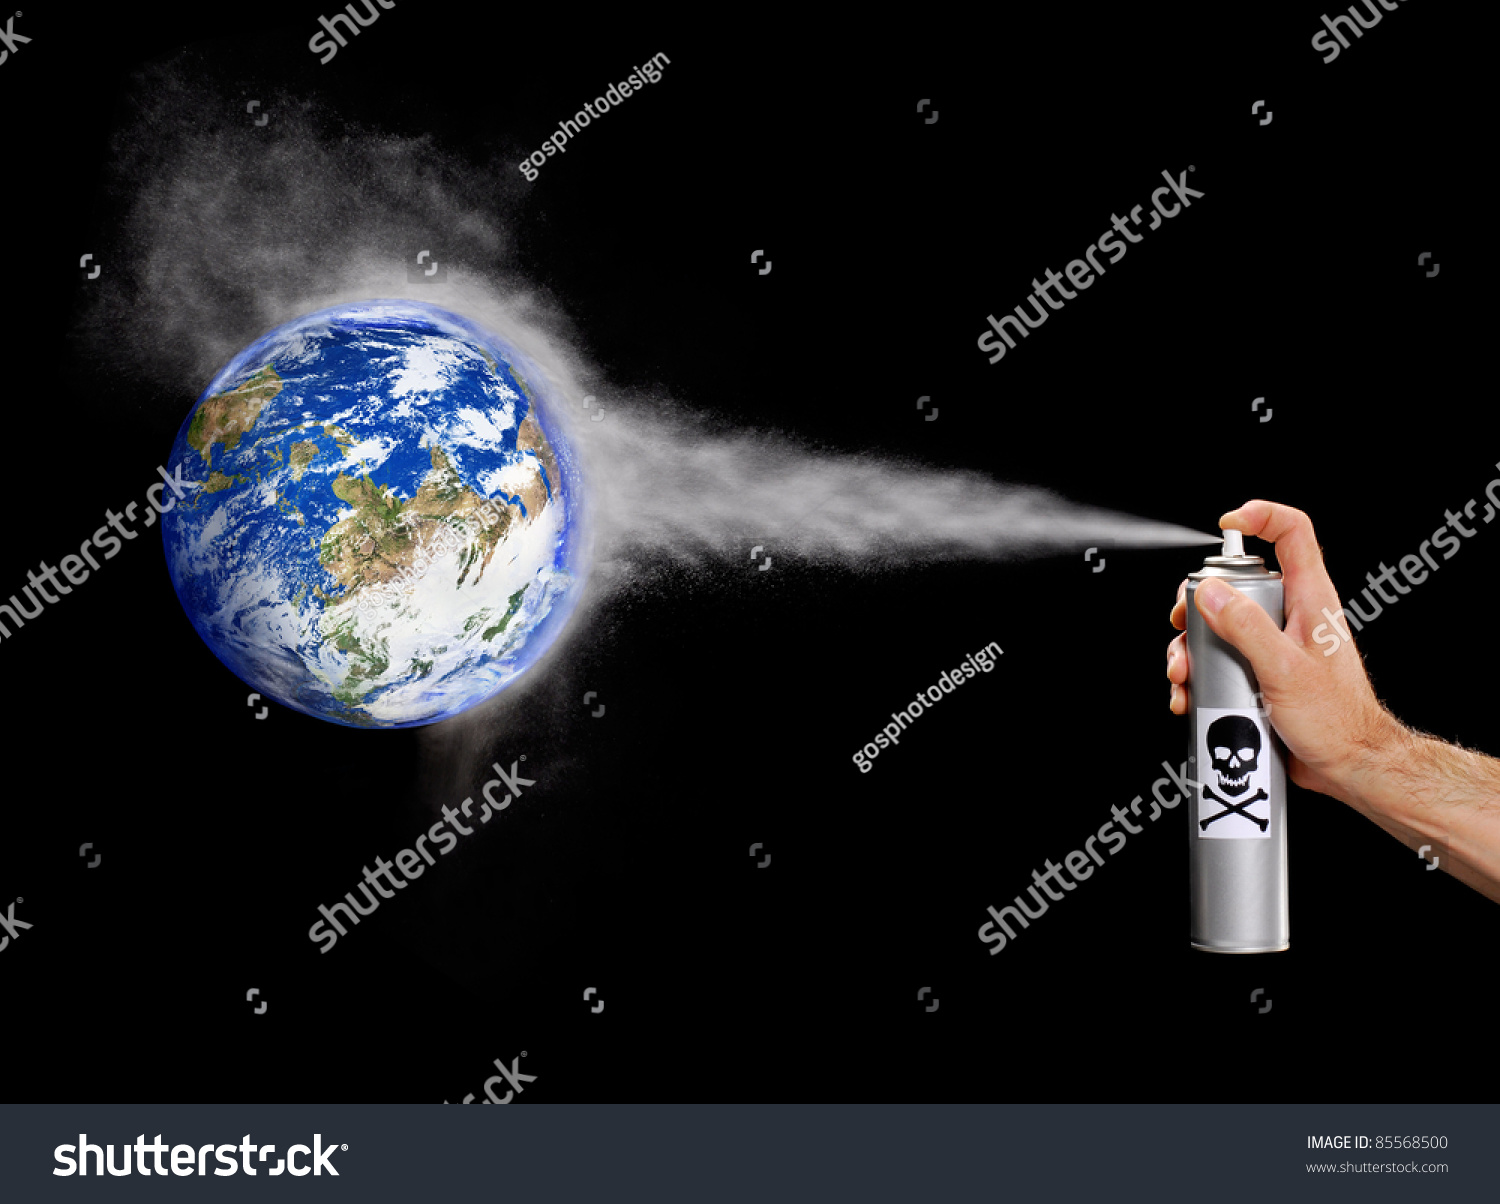 Image result for images of crazy people polluting earth